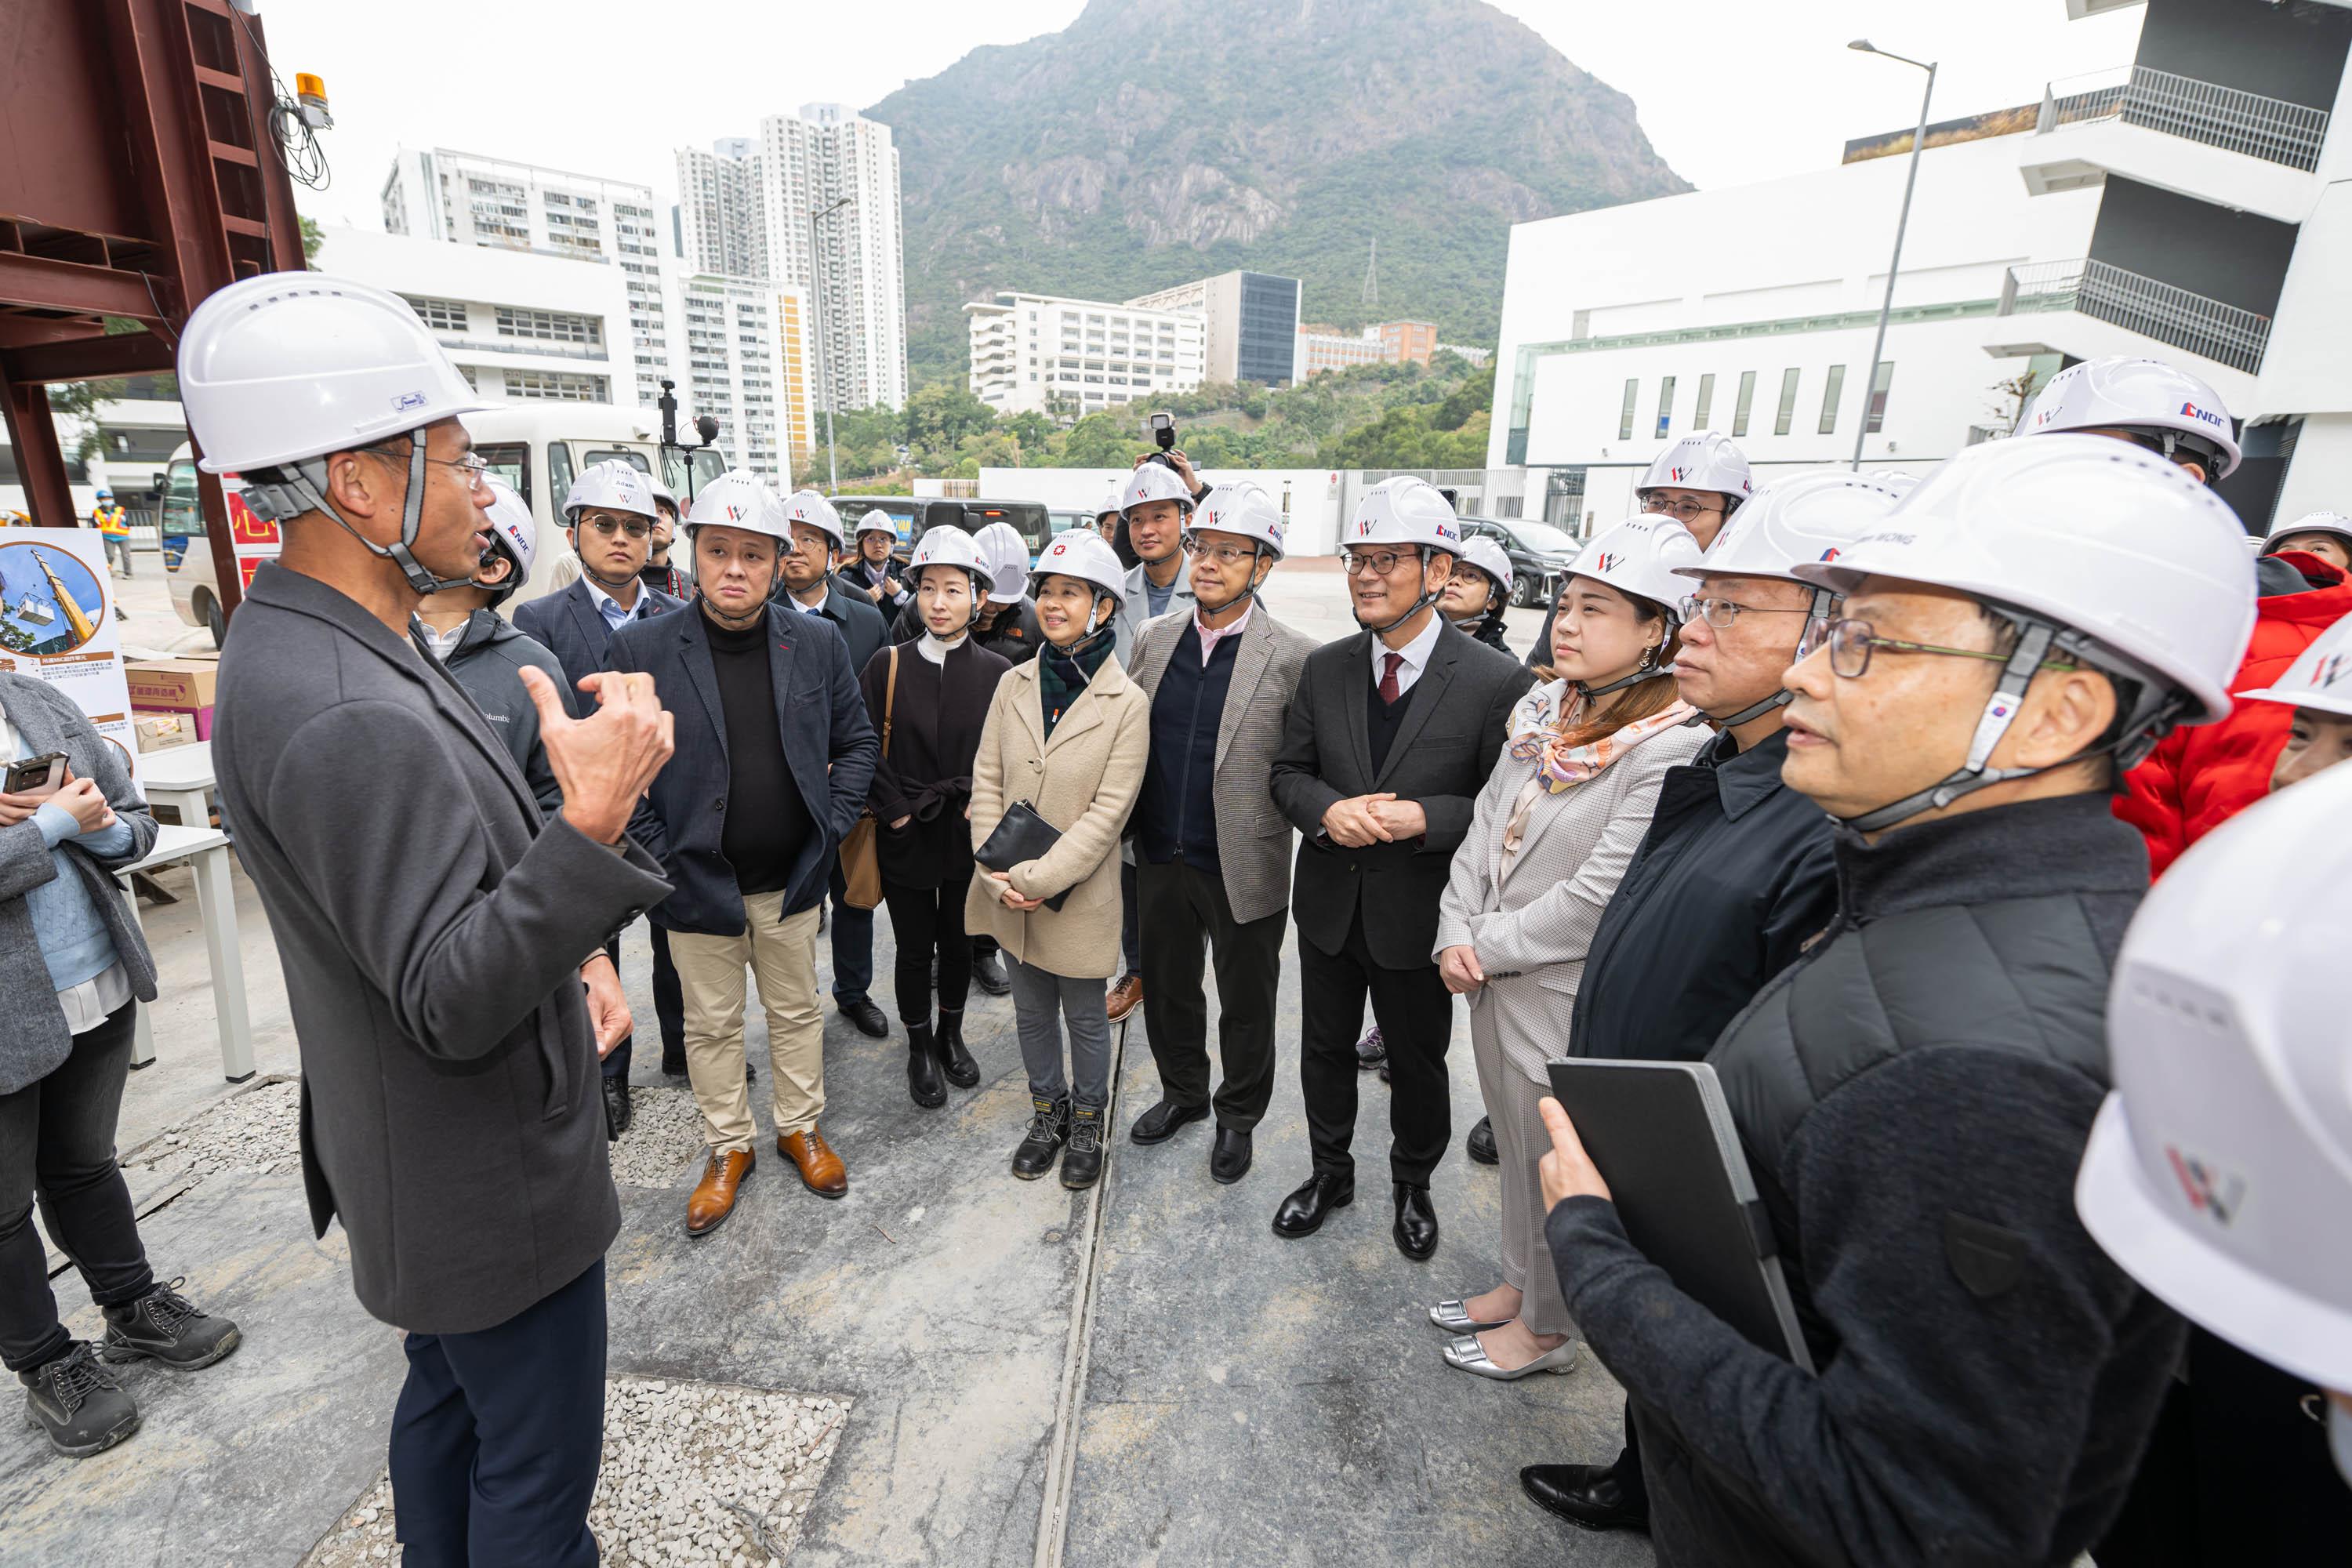 The Legislative Council (LegCo) Public Works Subcommittee visited the Choi Hing Road transitional housing project in Ngau Tau Kok today (January 29). Photo shows LegCo Members receiving a briefing on the Choi Hing Road project. 
